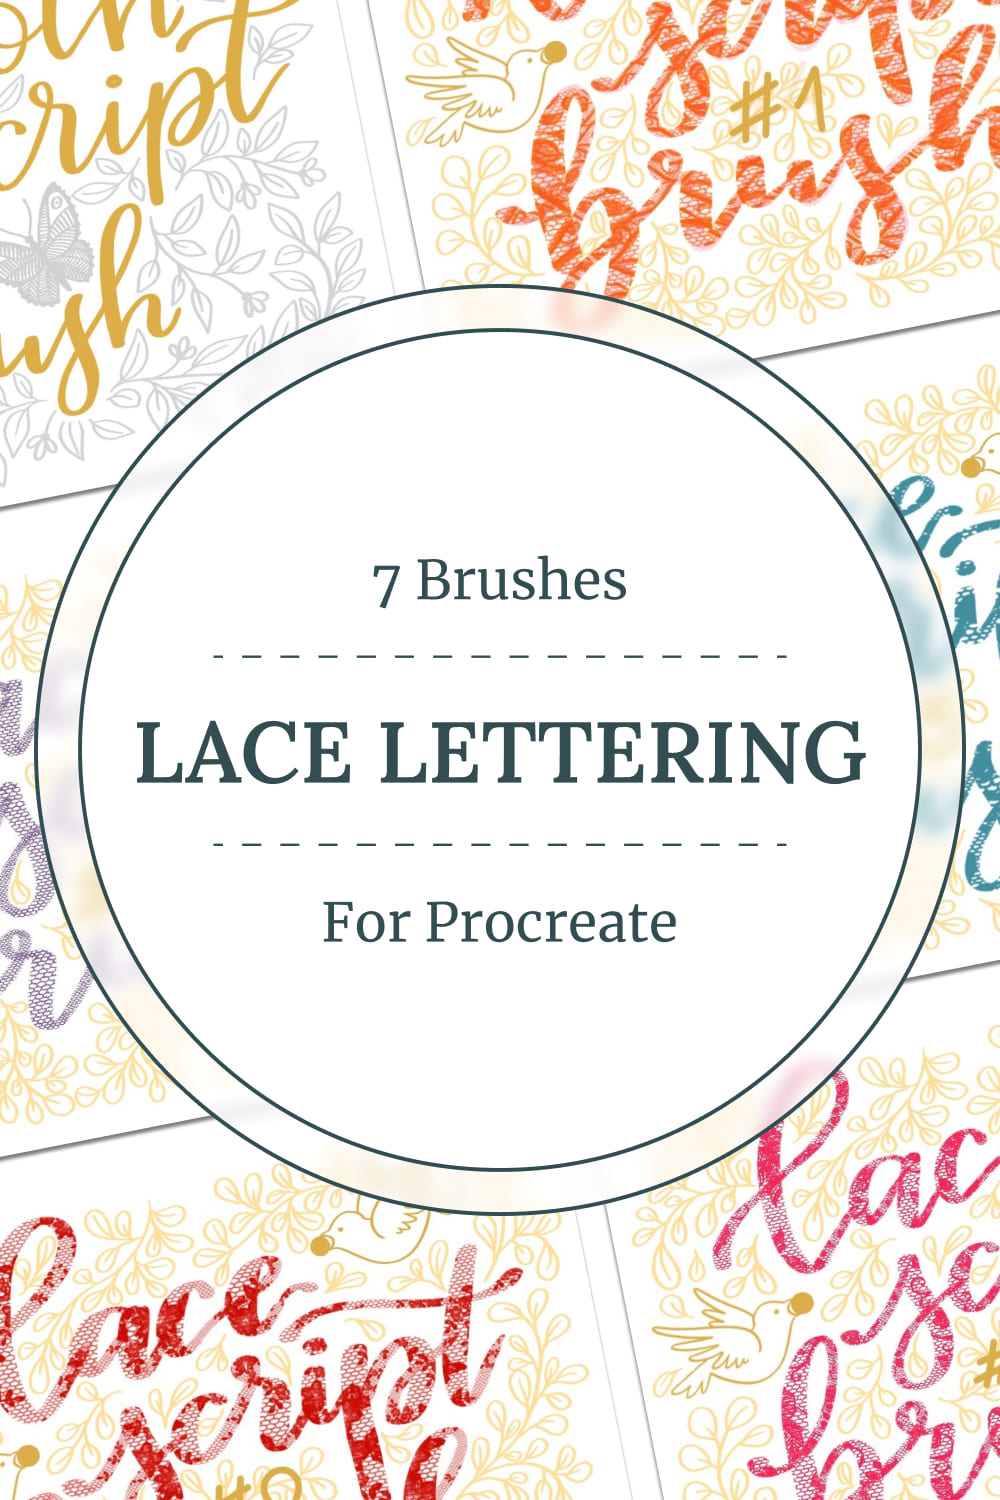 lace lettering brushes for procreate 02 278